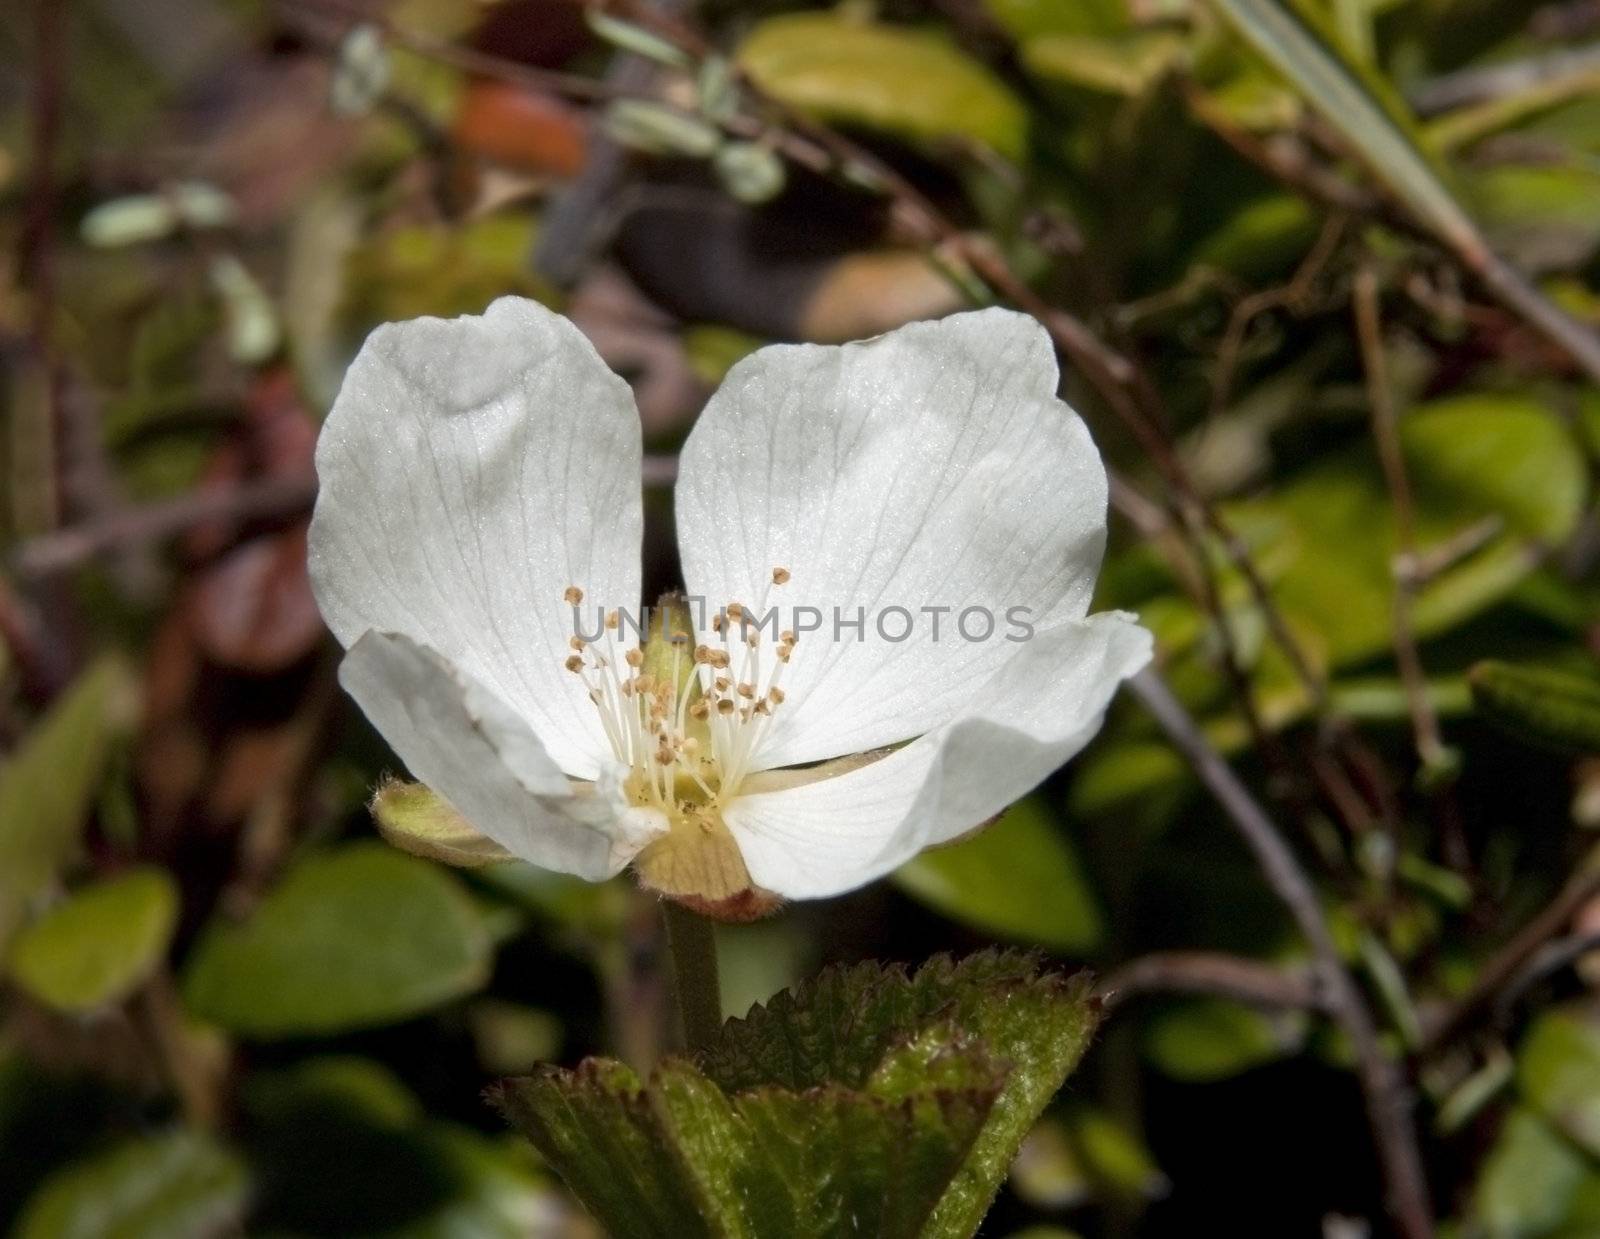 cloudberry flower in the wild